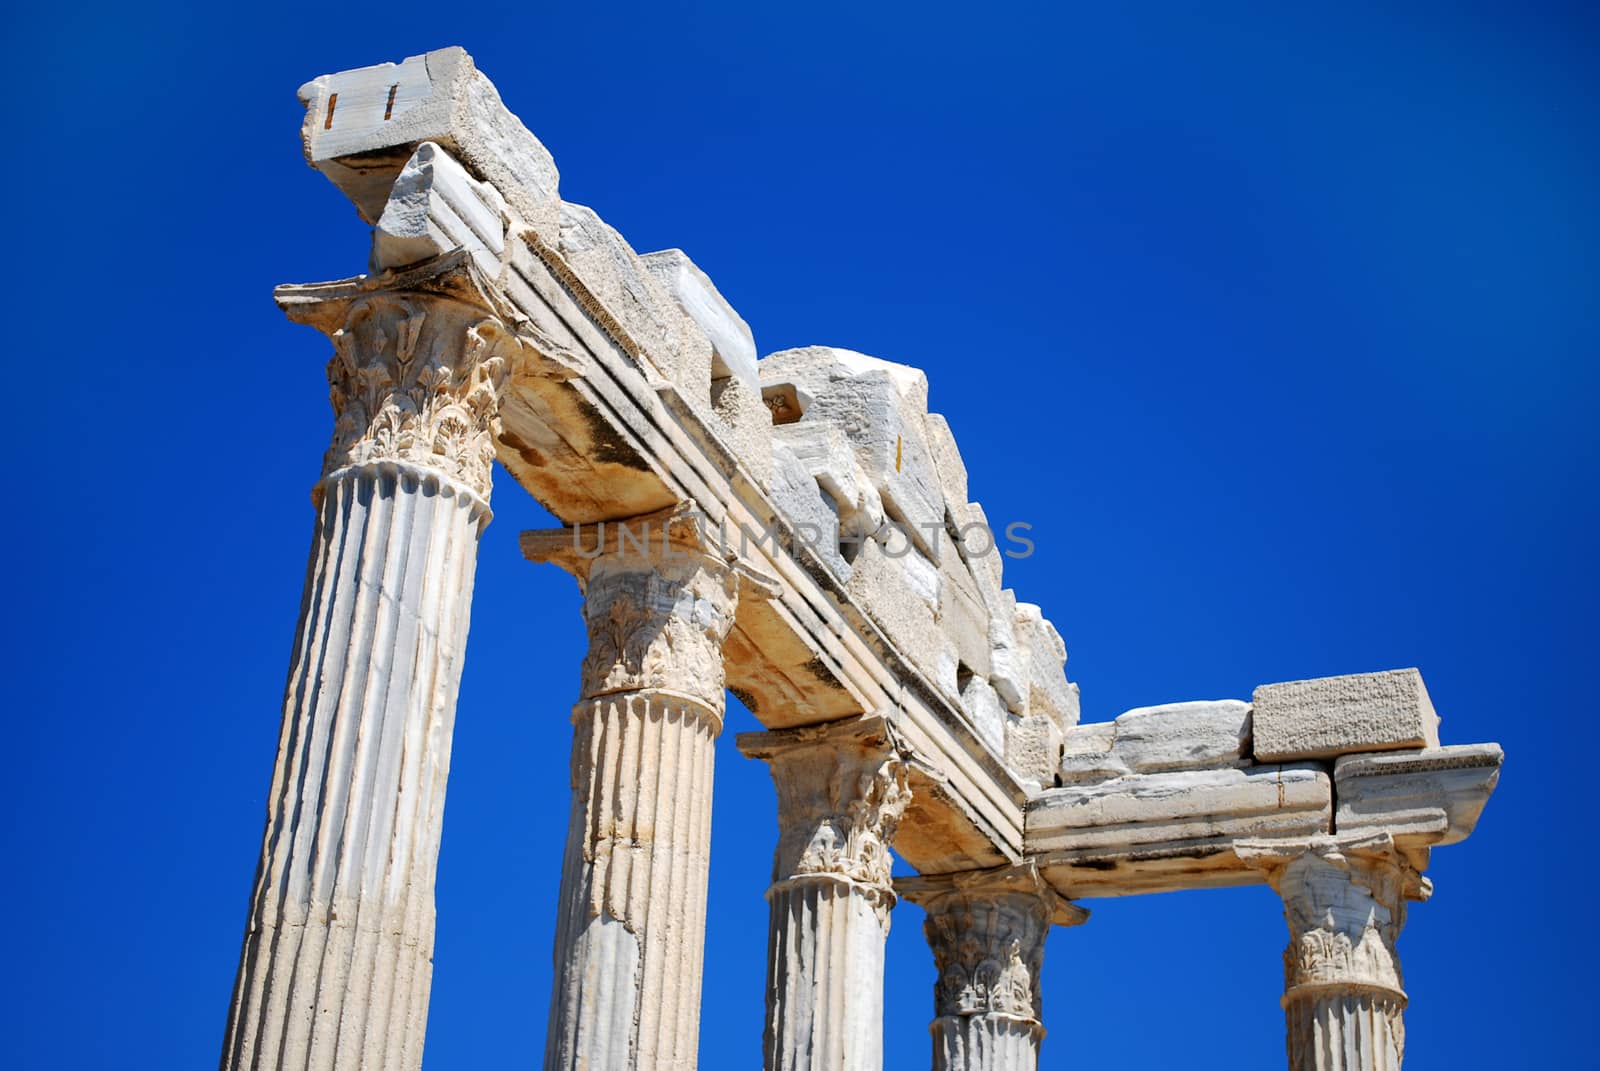 Ruined Columns of Ancient Greek Temple on Blue Sky Background